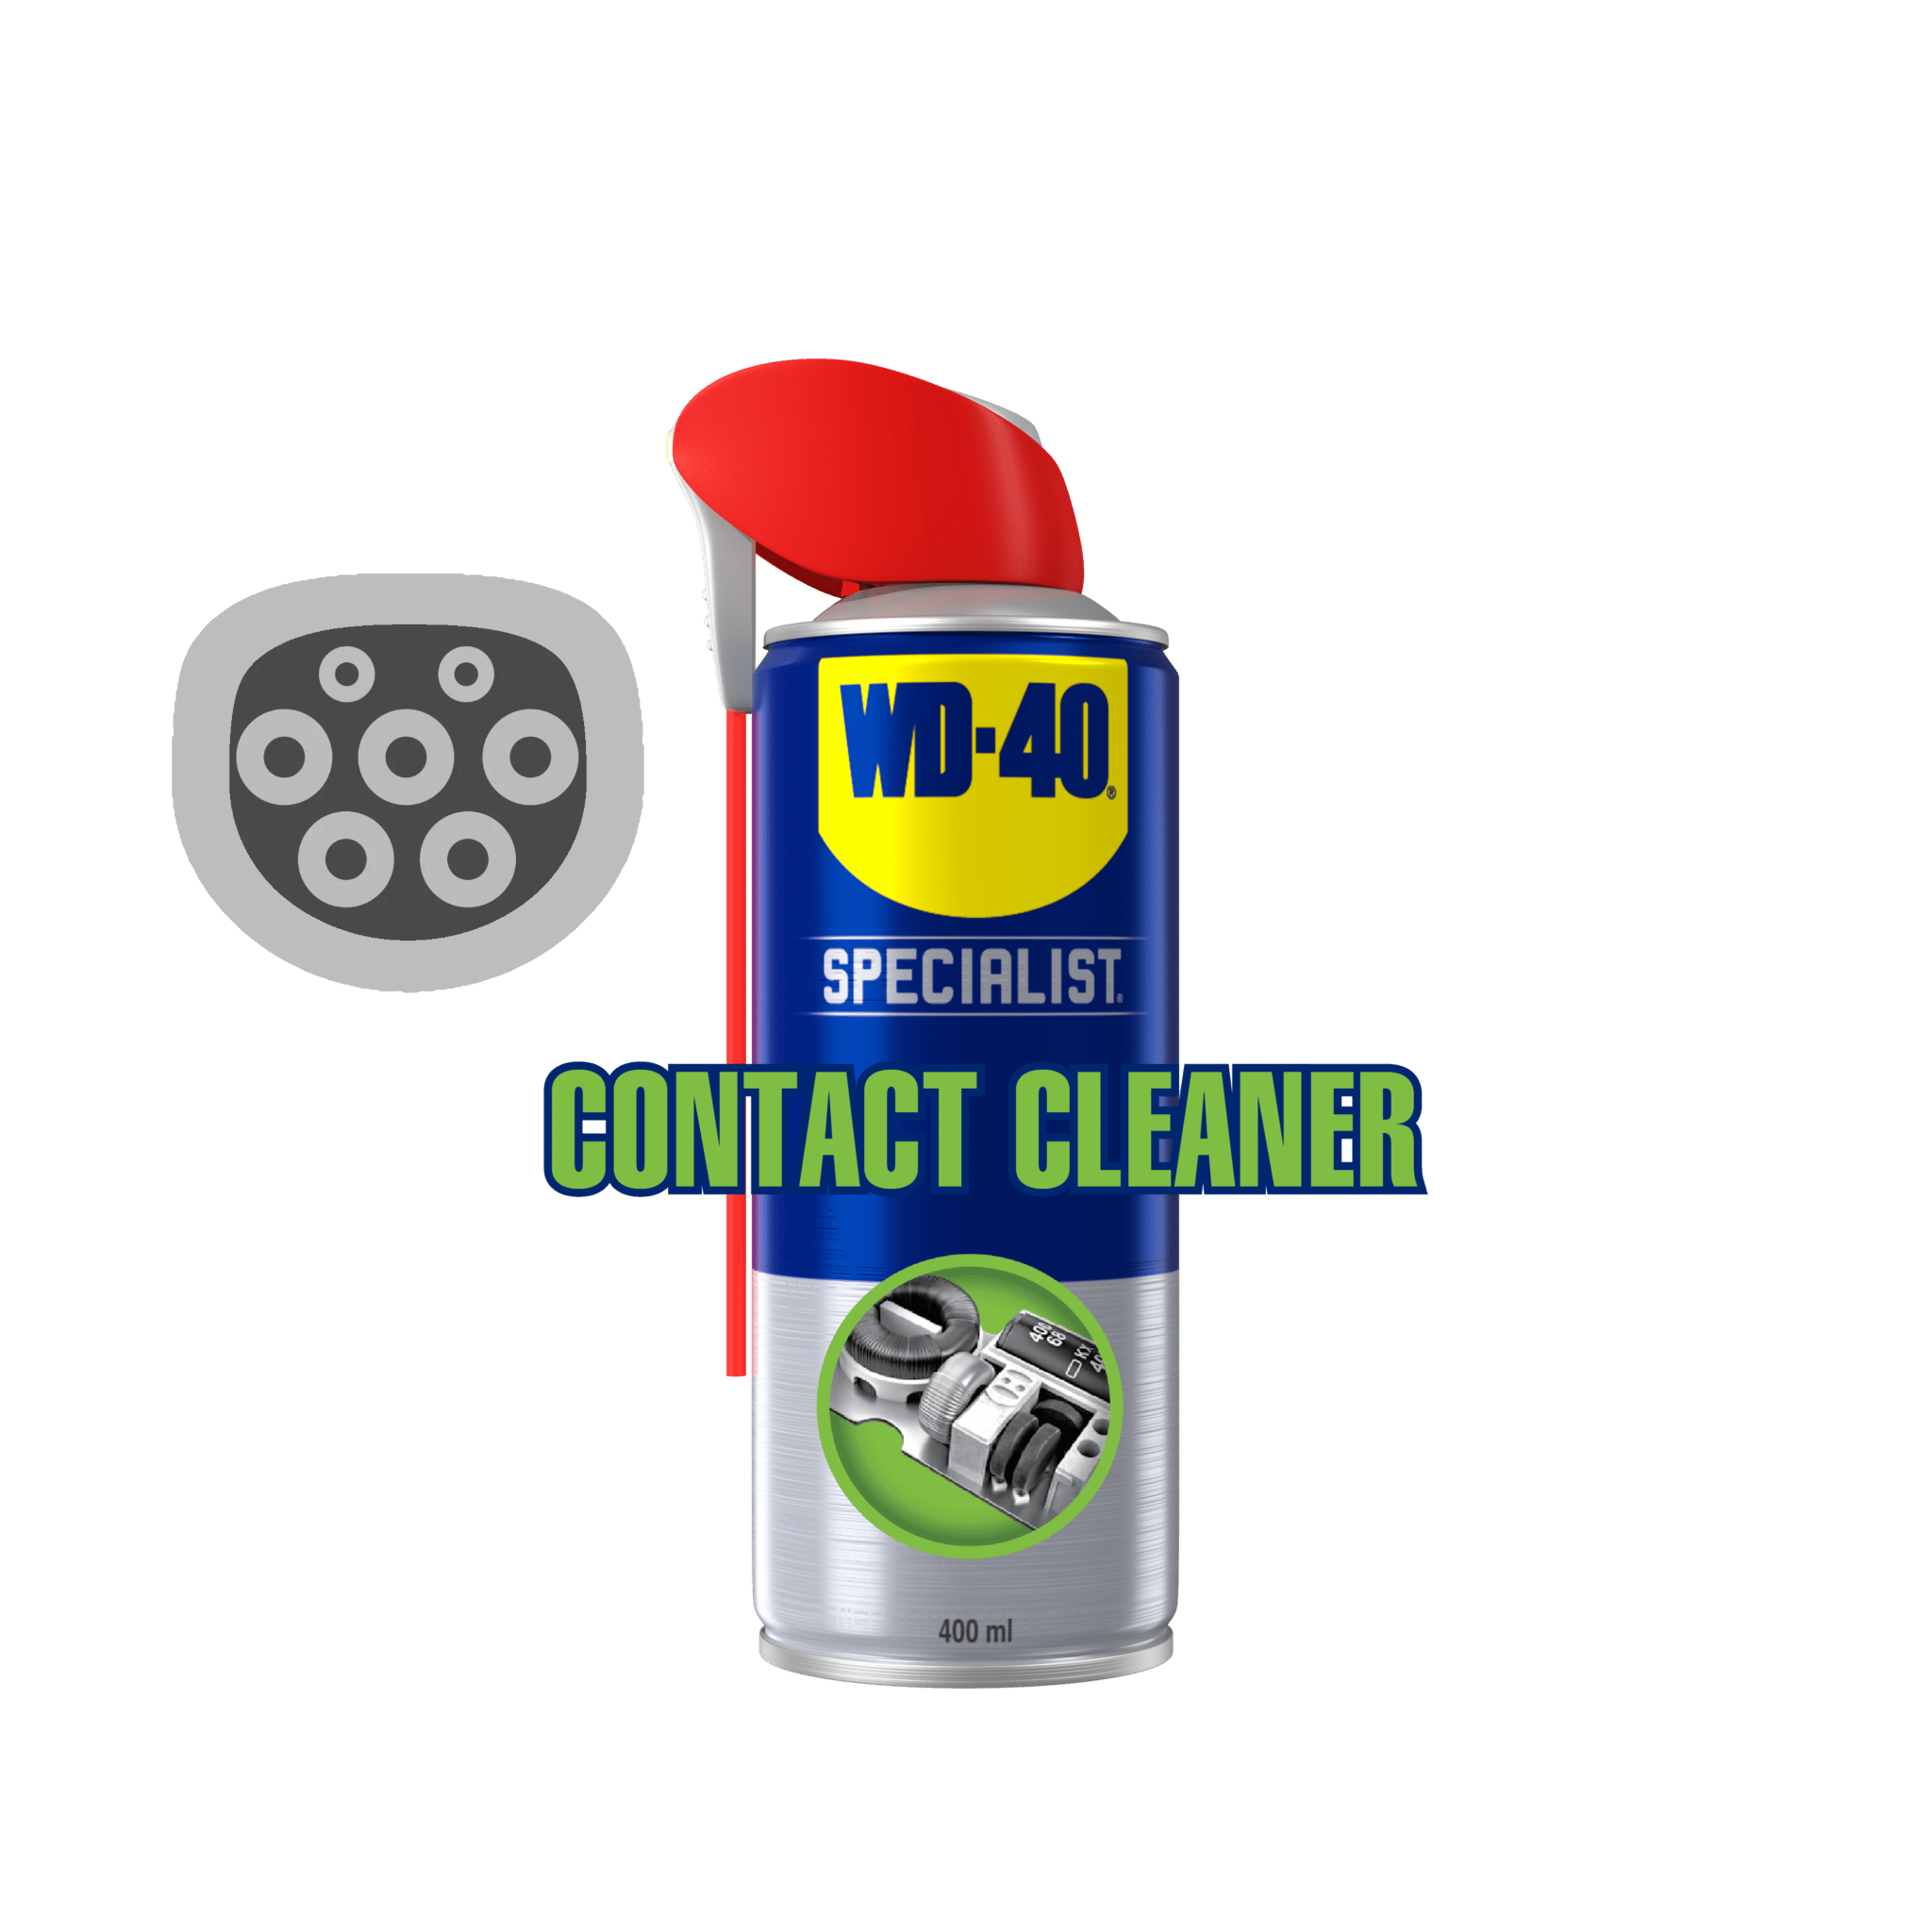 Specialist Contact Cleaner